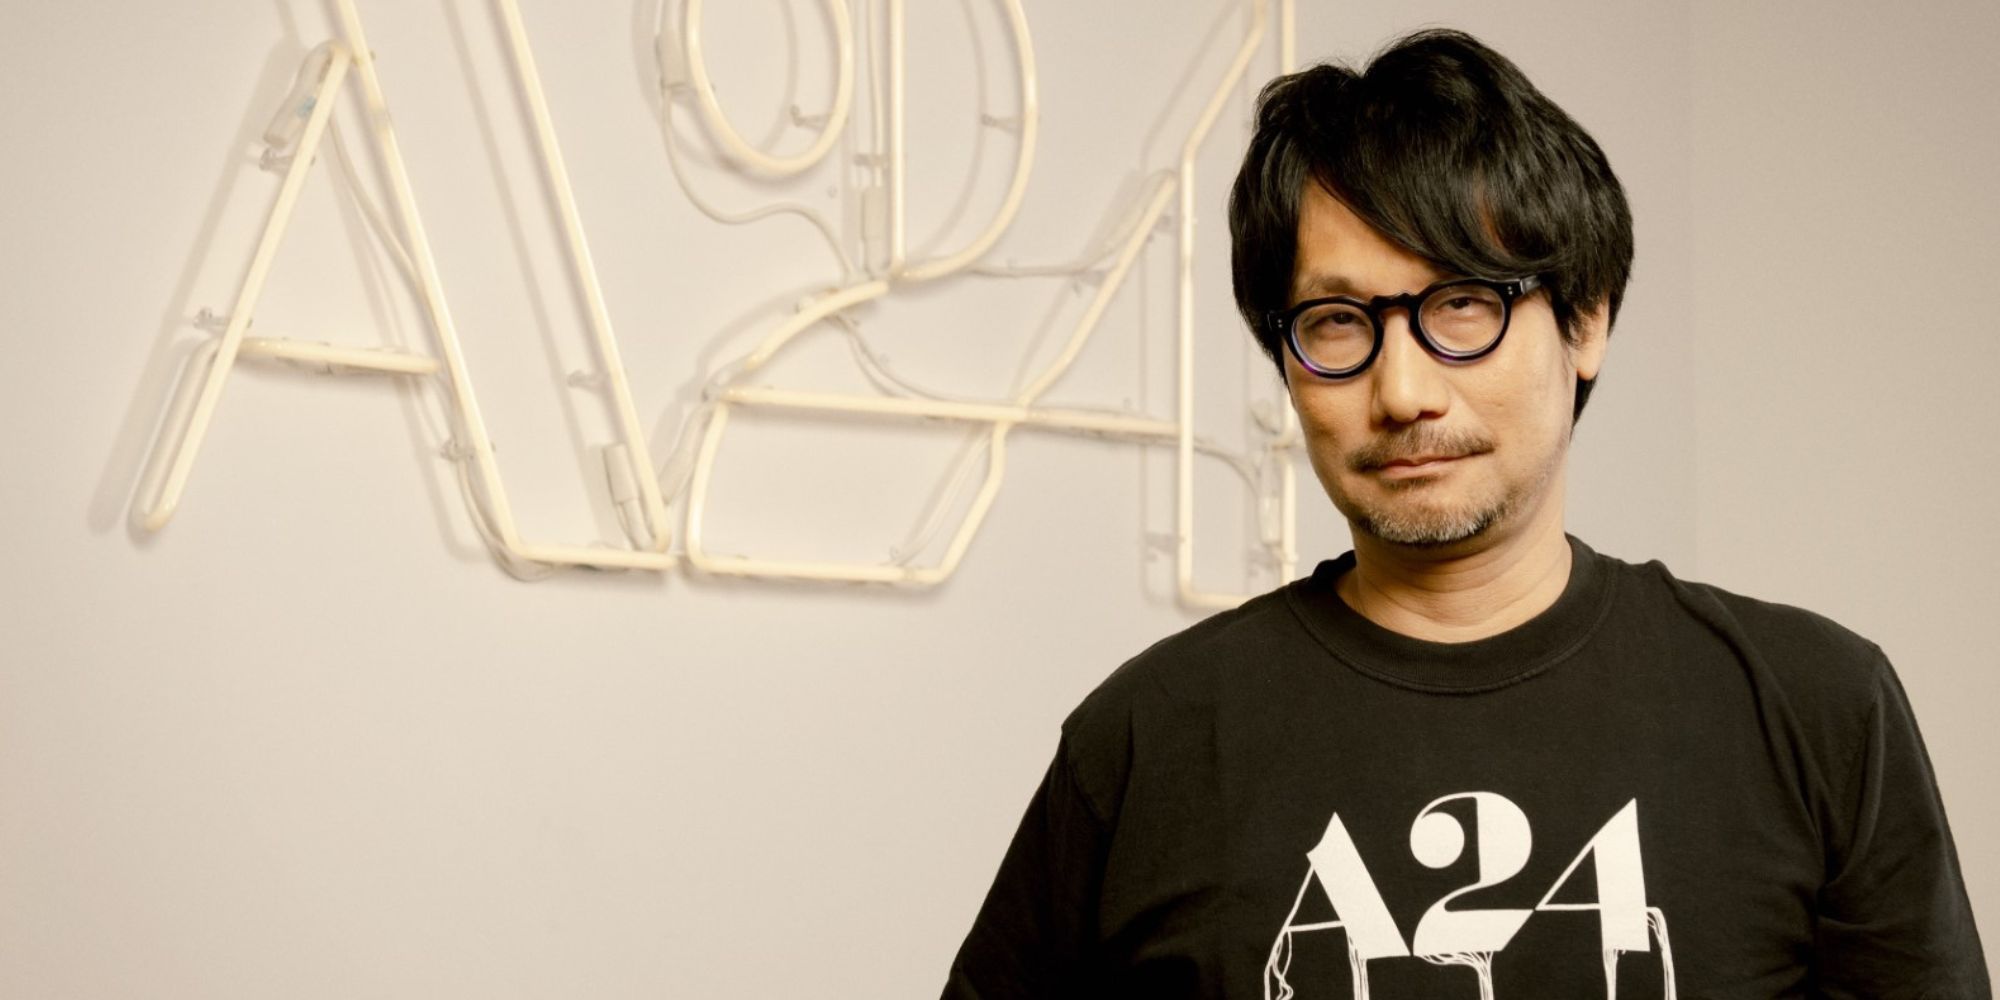 Hideo Kojima in front of the A24 logo, in an A24 shirt